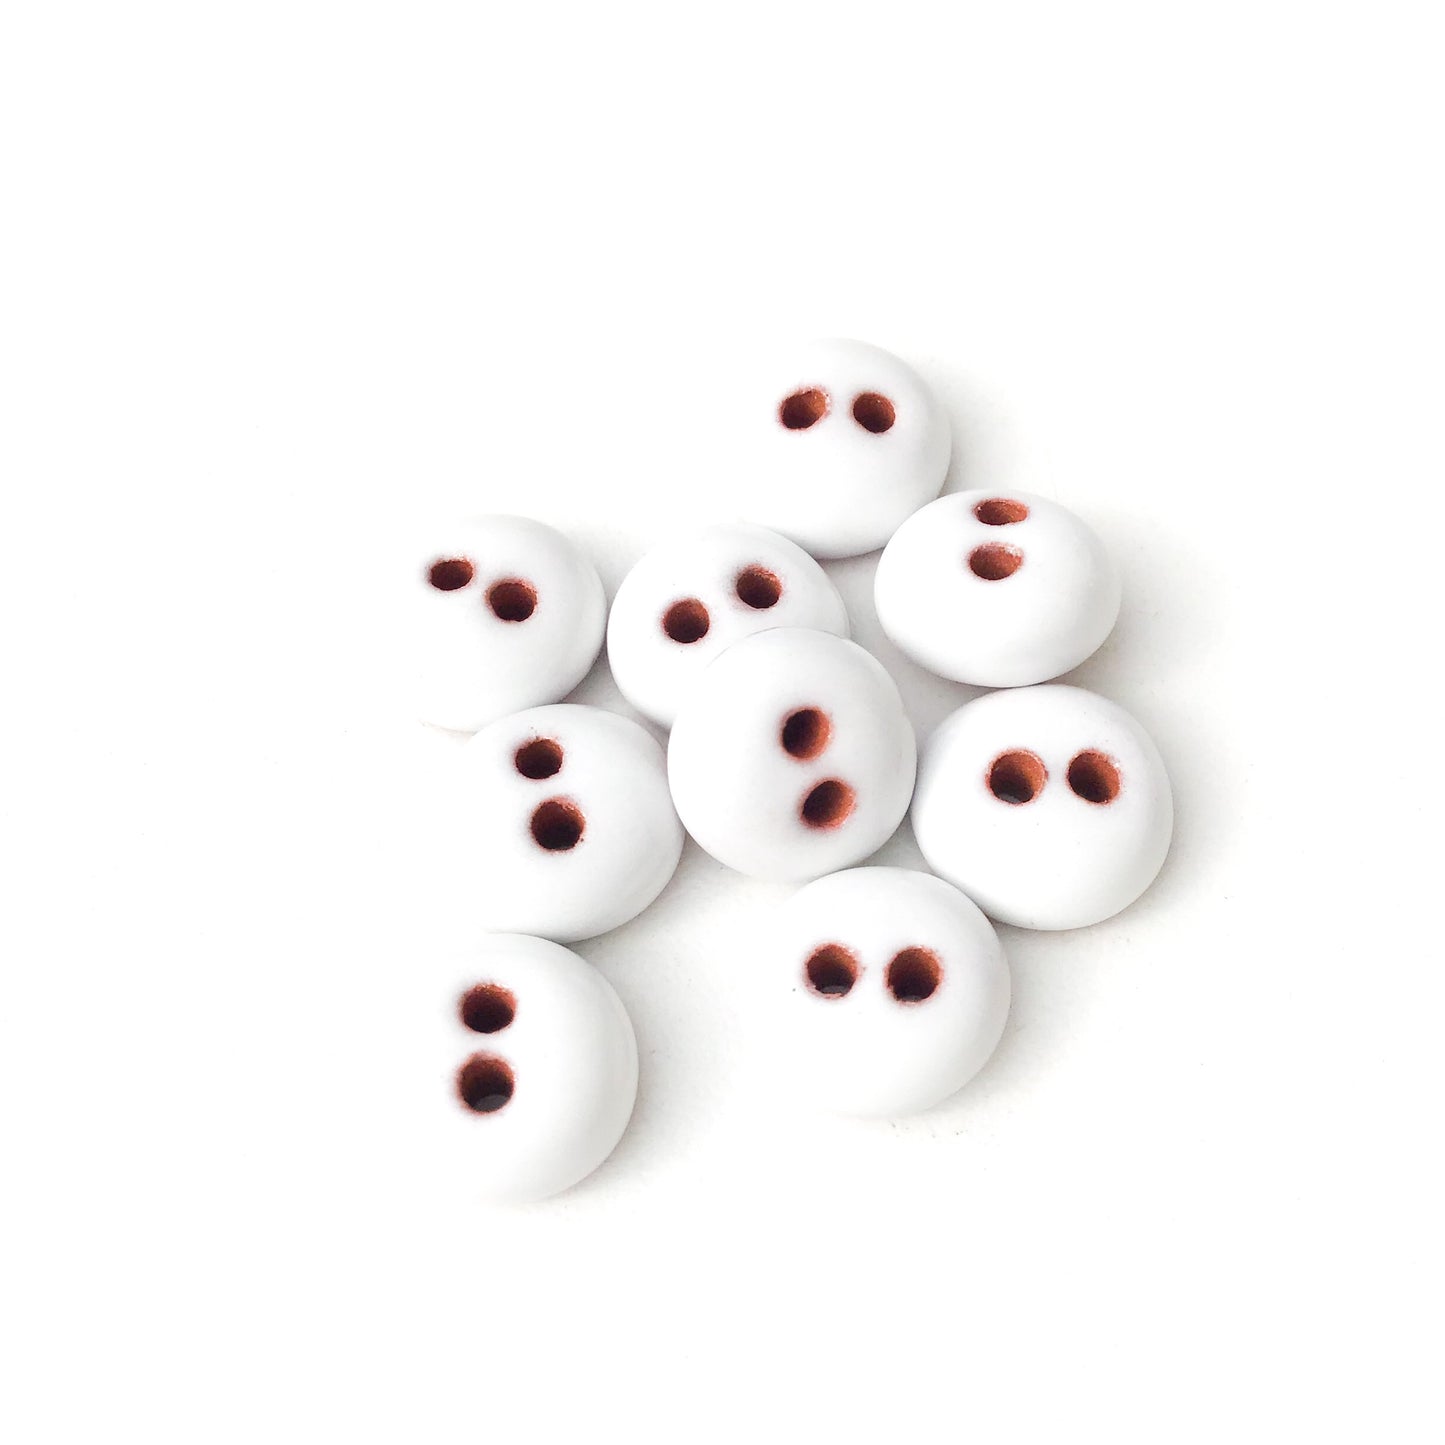 White Ceramic Buttons - Hand Made Clay Buttons - 7/16" - 9 Pack